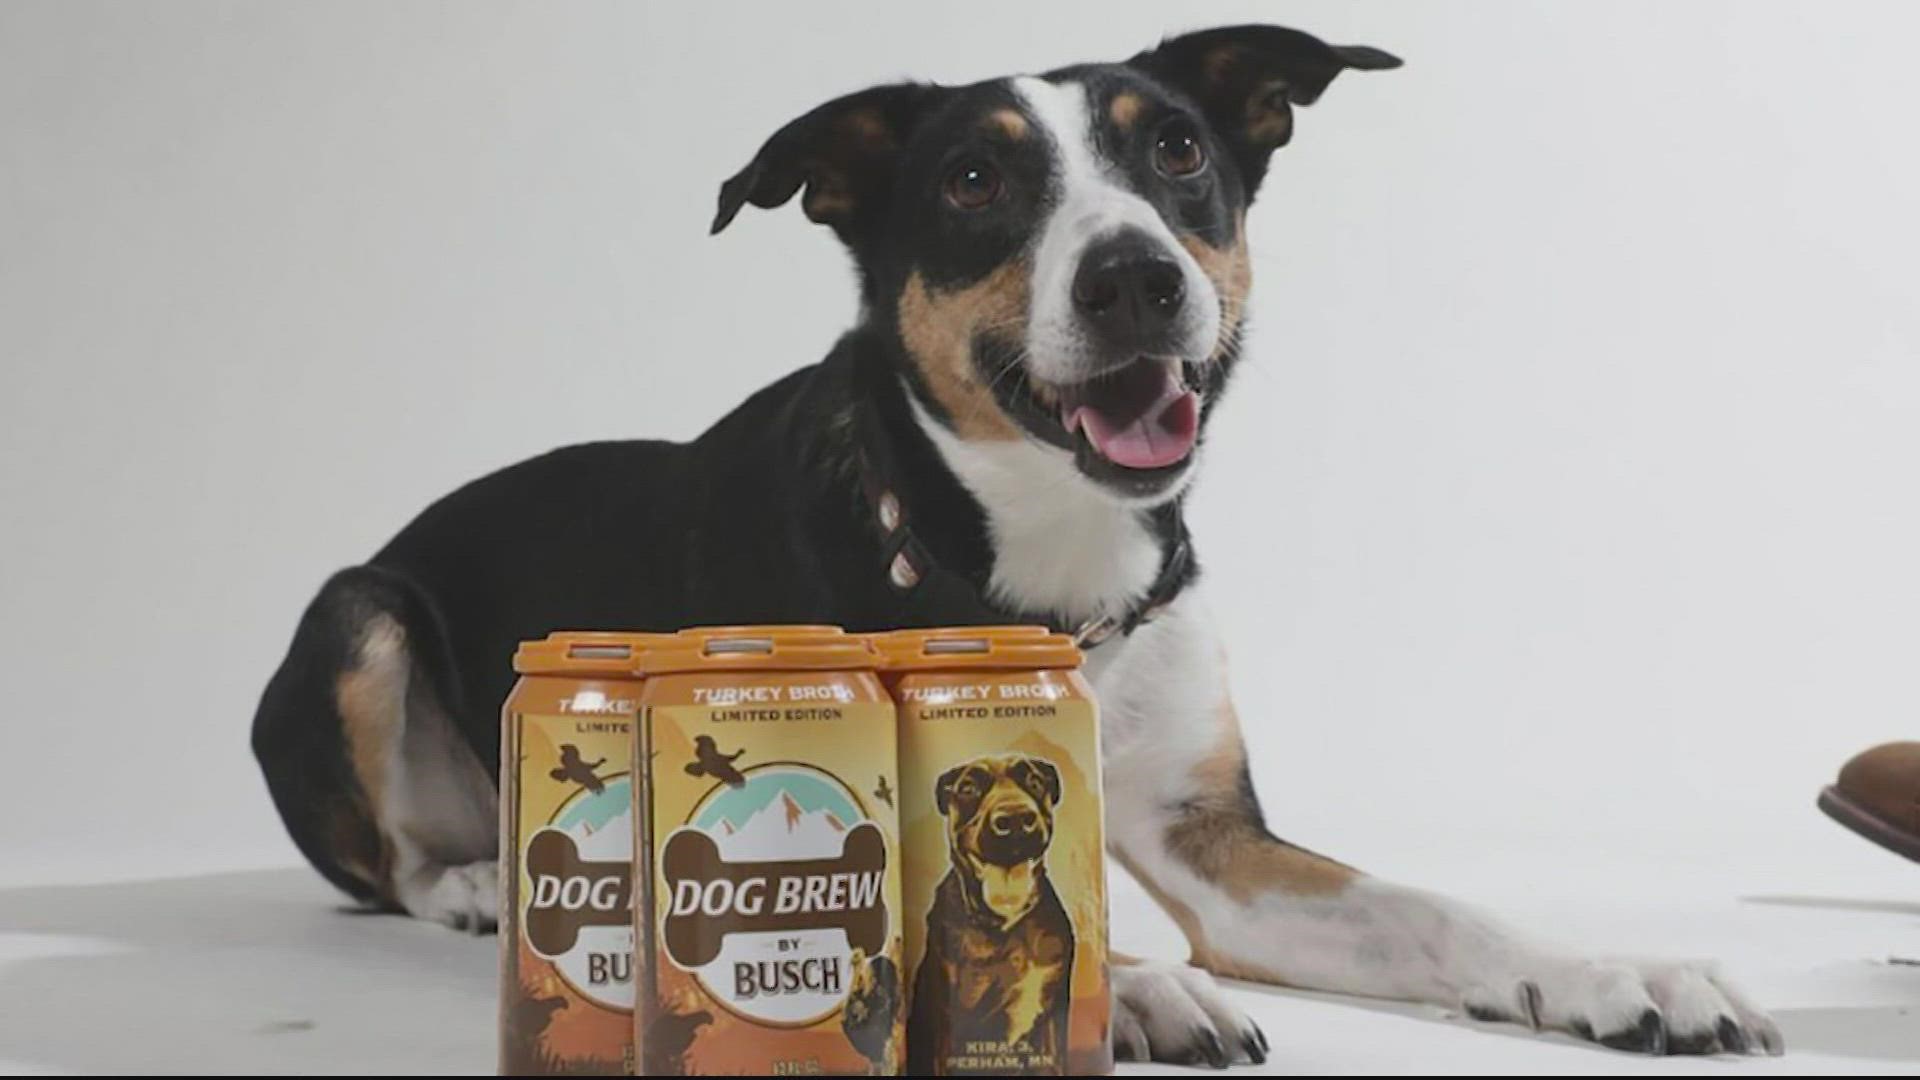 Our dogs are our best friends. But do you ever wish you could kick back with your pup and share a beer?